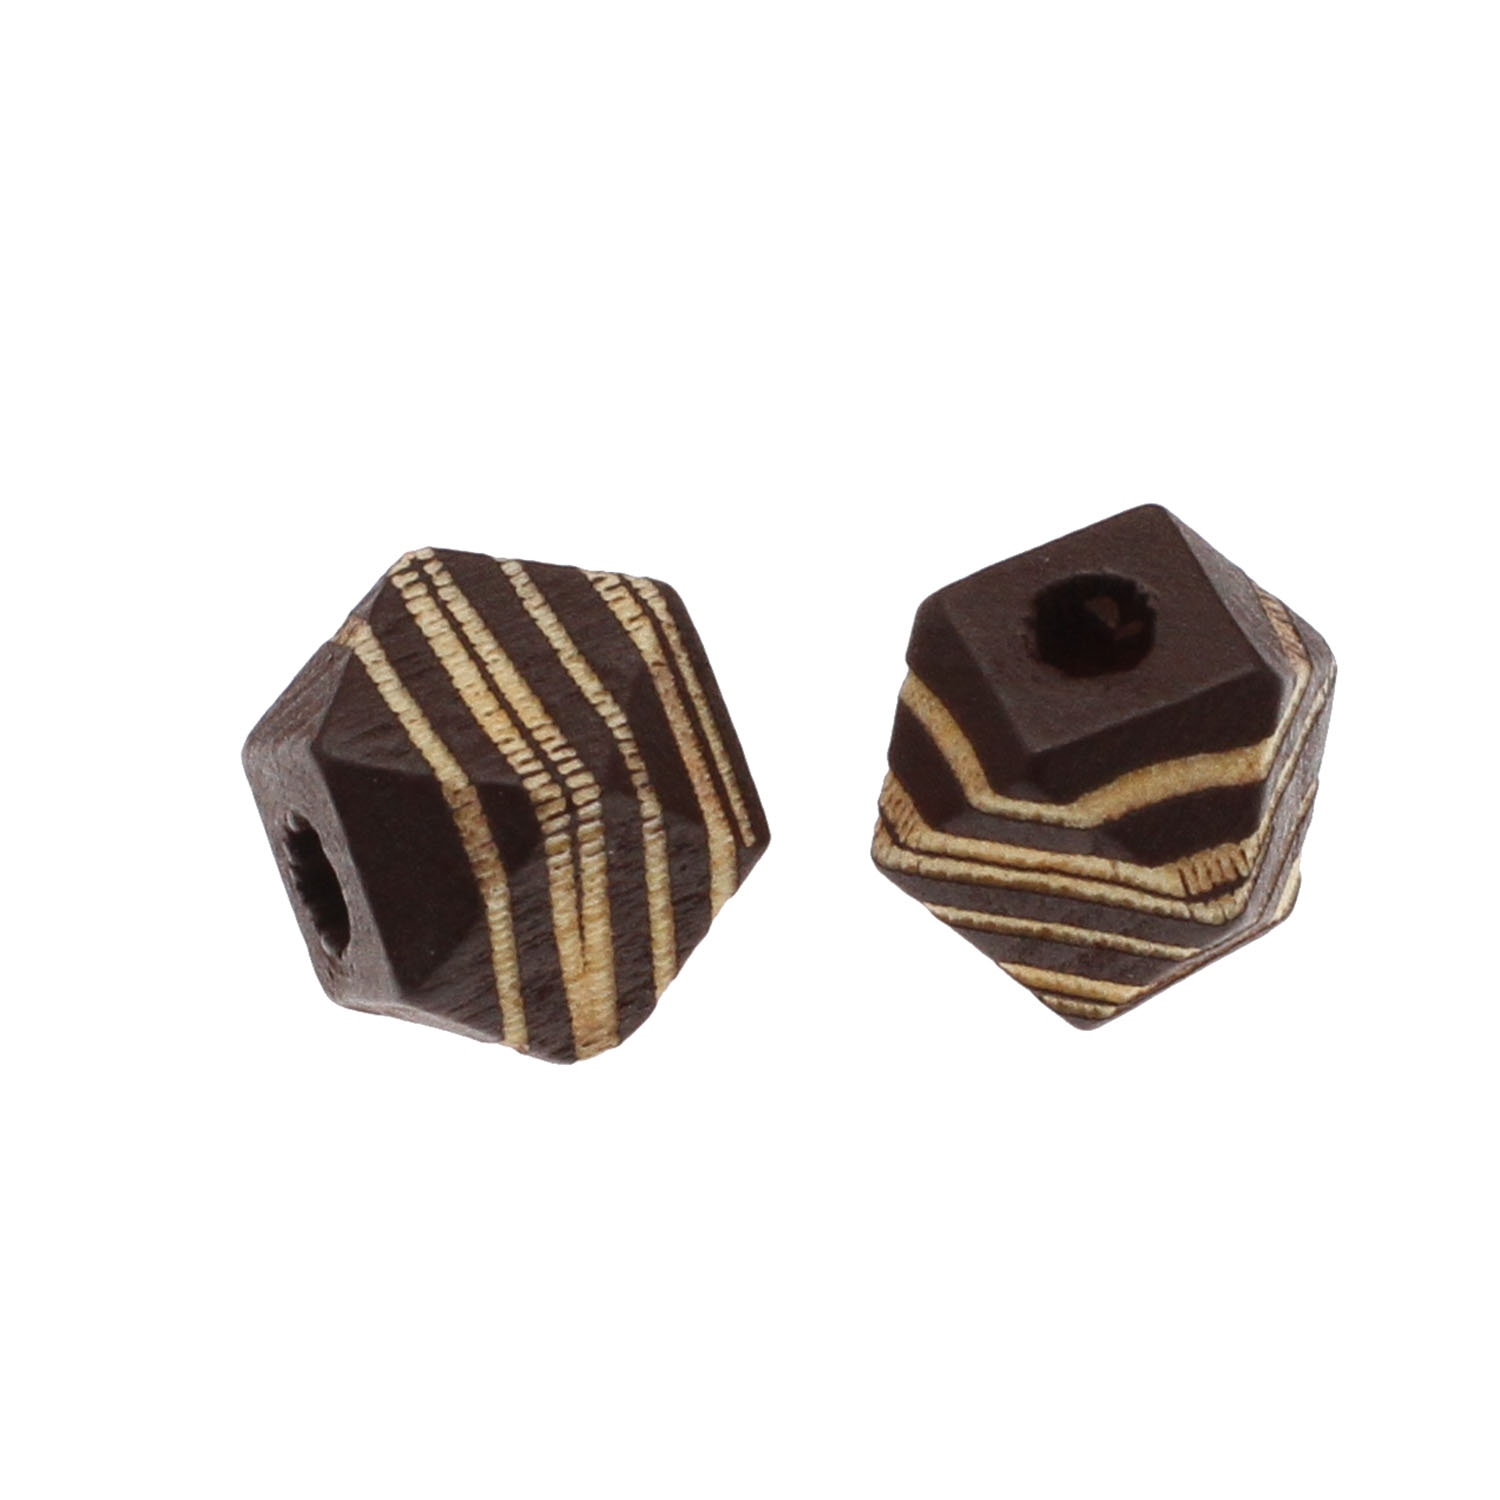 brown, 12x12mm, Hole: 3mm